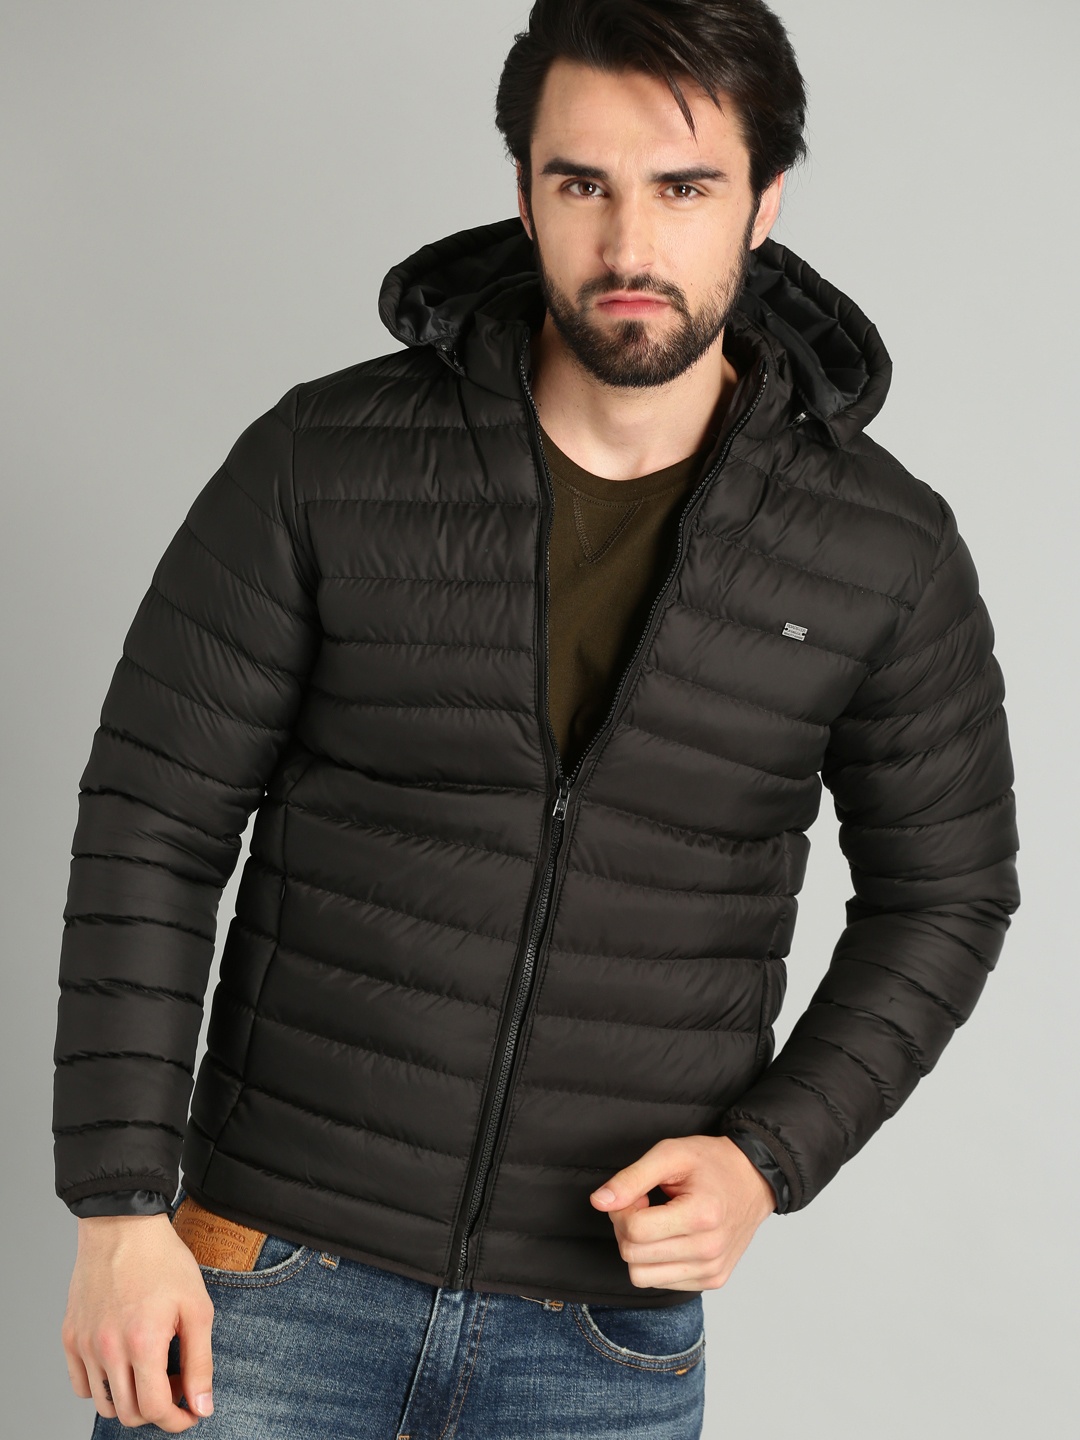 The Roadster Lifestyle Co Men Black Solid Puffer Jacket - buy at the ...